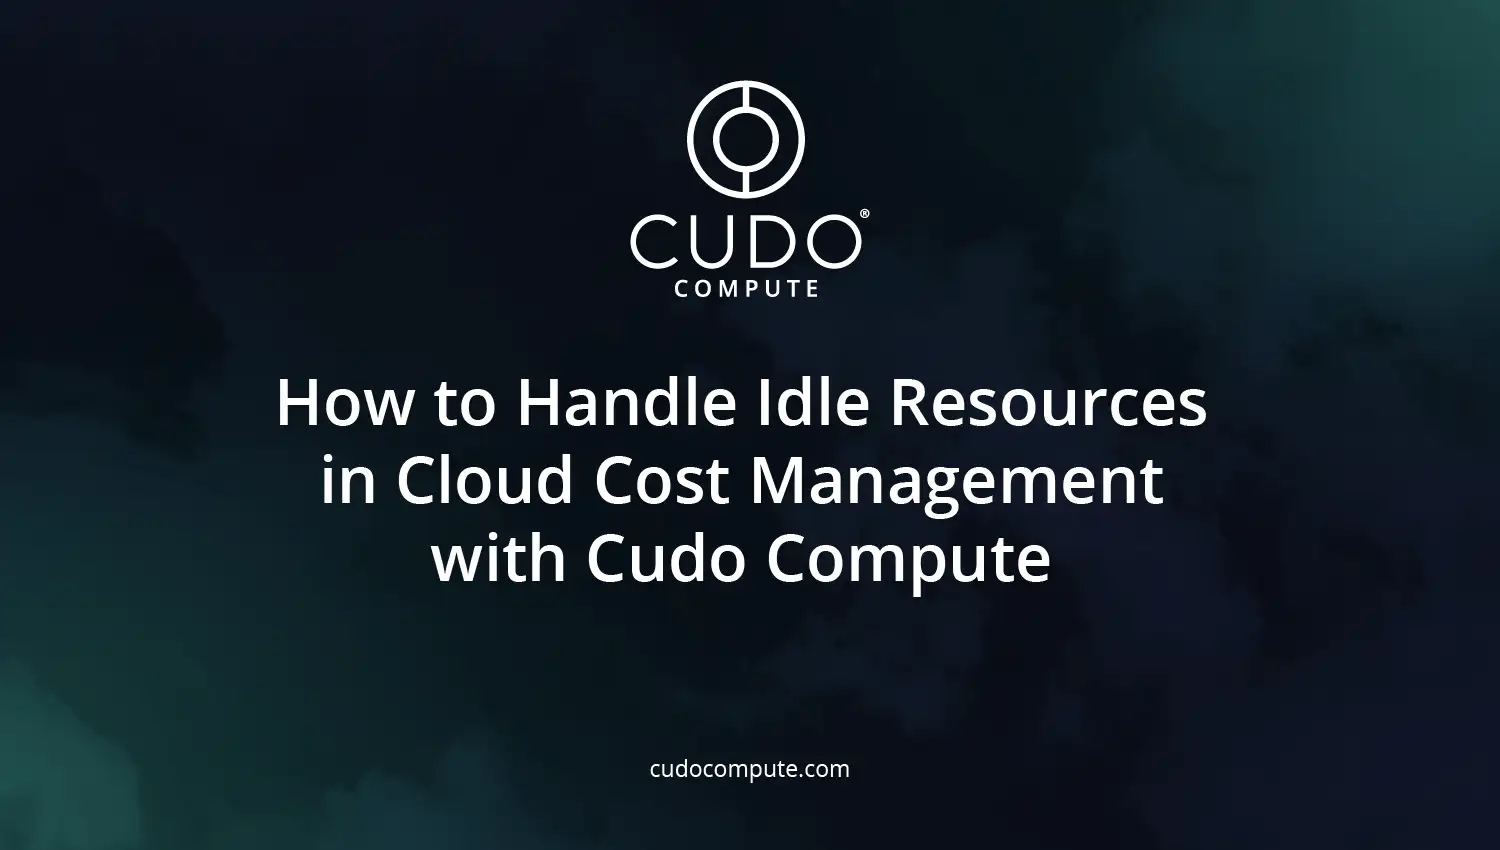 How to handle idle resources in cloud cost management with Cudo Compute cover photo